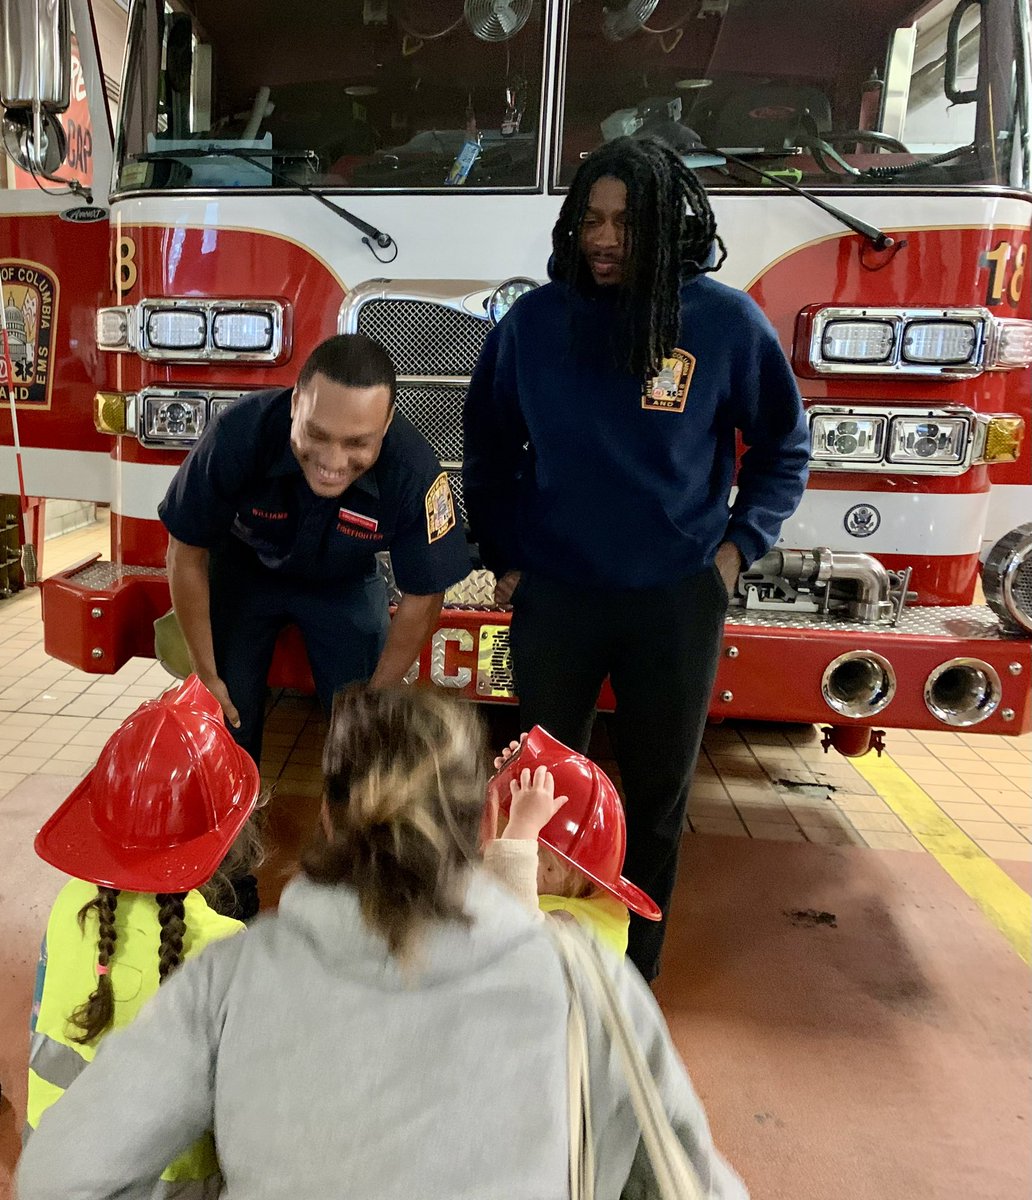 A group of children from the G St cooperative/Christ Church paid a visit to the firehouse of Engine 18 and Truck 7 on @BarracksRow. Our firefighters were delighted to welcome them and plastic fire helmets were the order of the day. Every day is a community day. #dDCsBravest